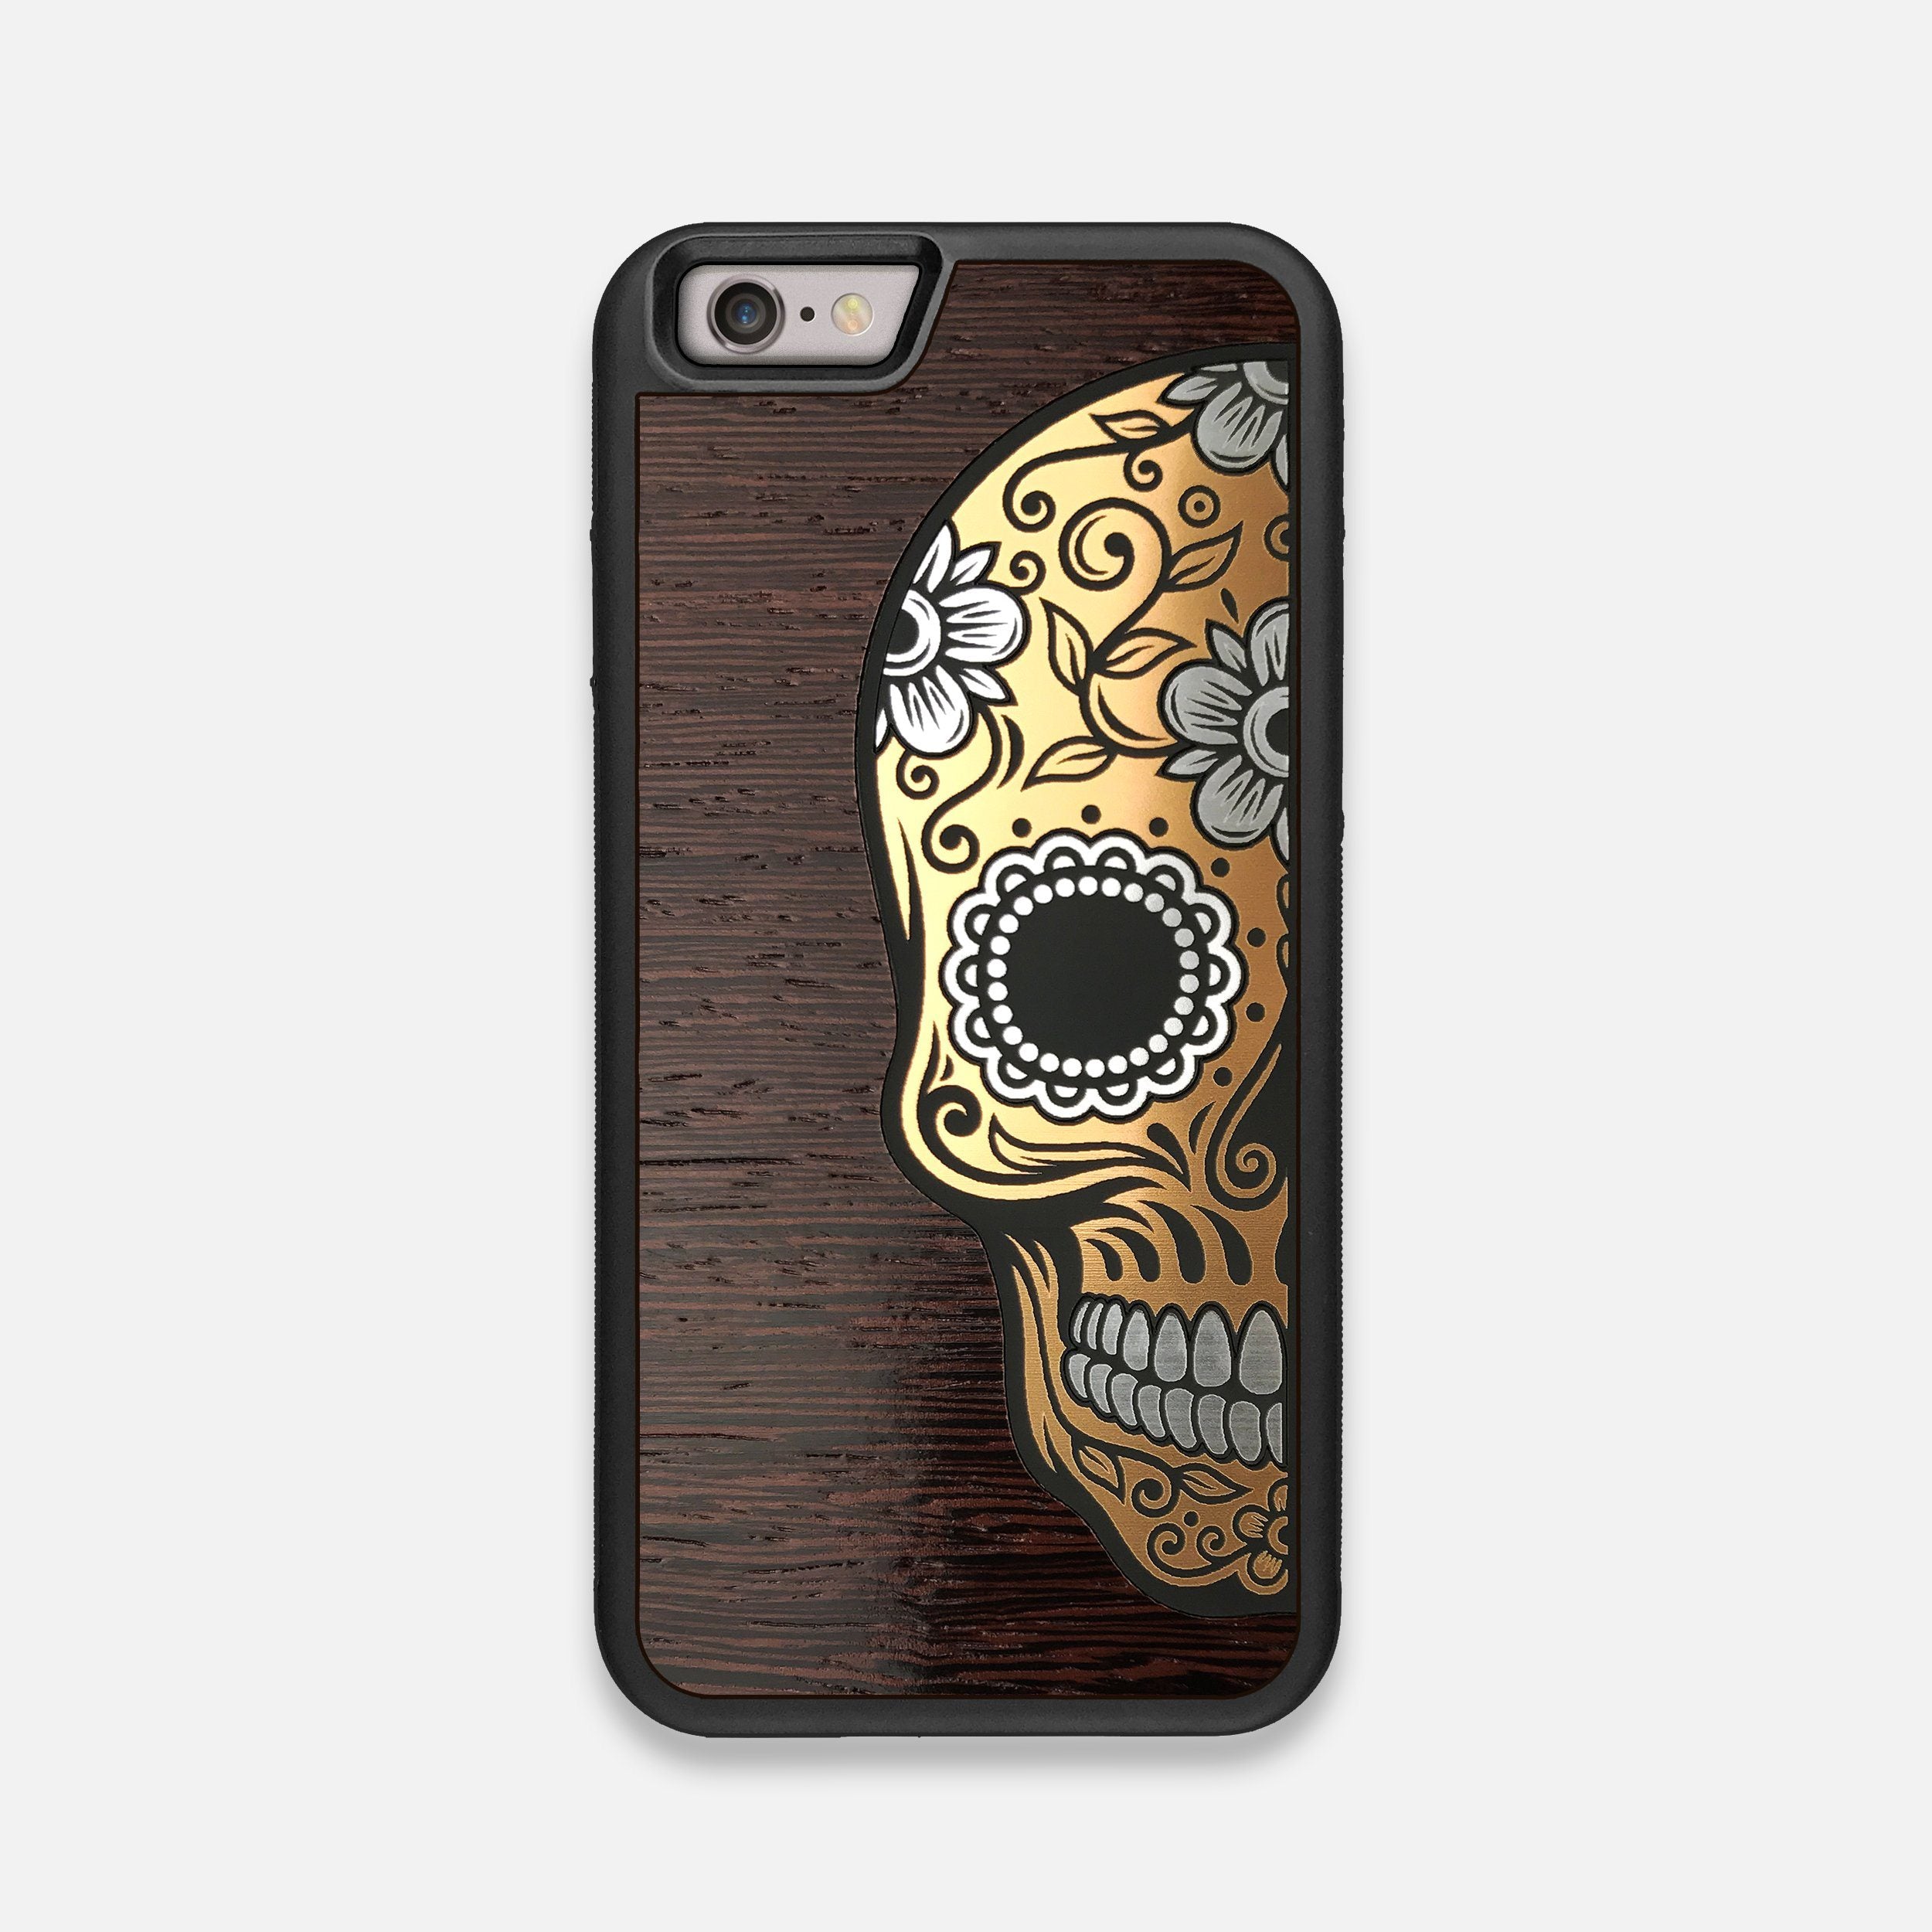 Front view of the Calavera Wood Sugar Skull Wood iPhone 6 Case by Keyway Designs